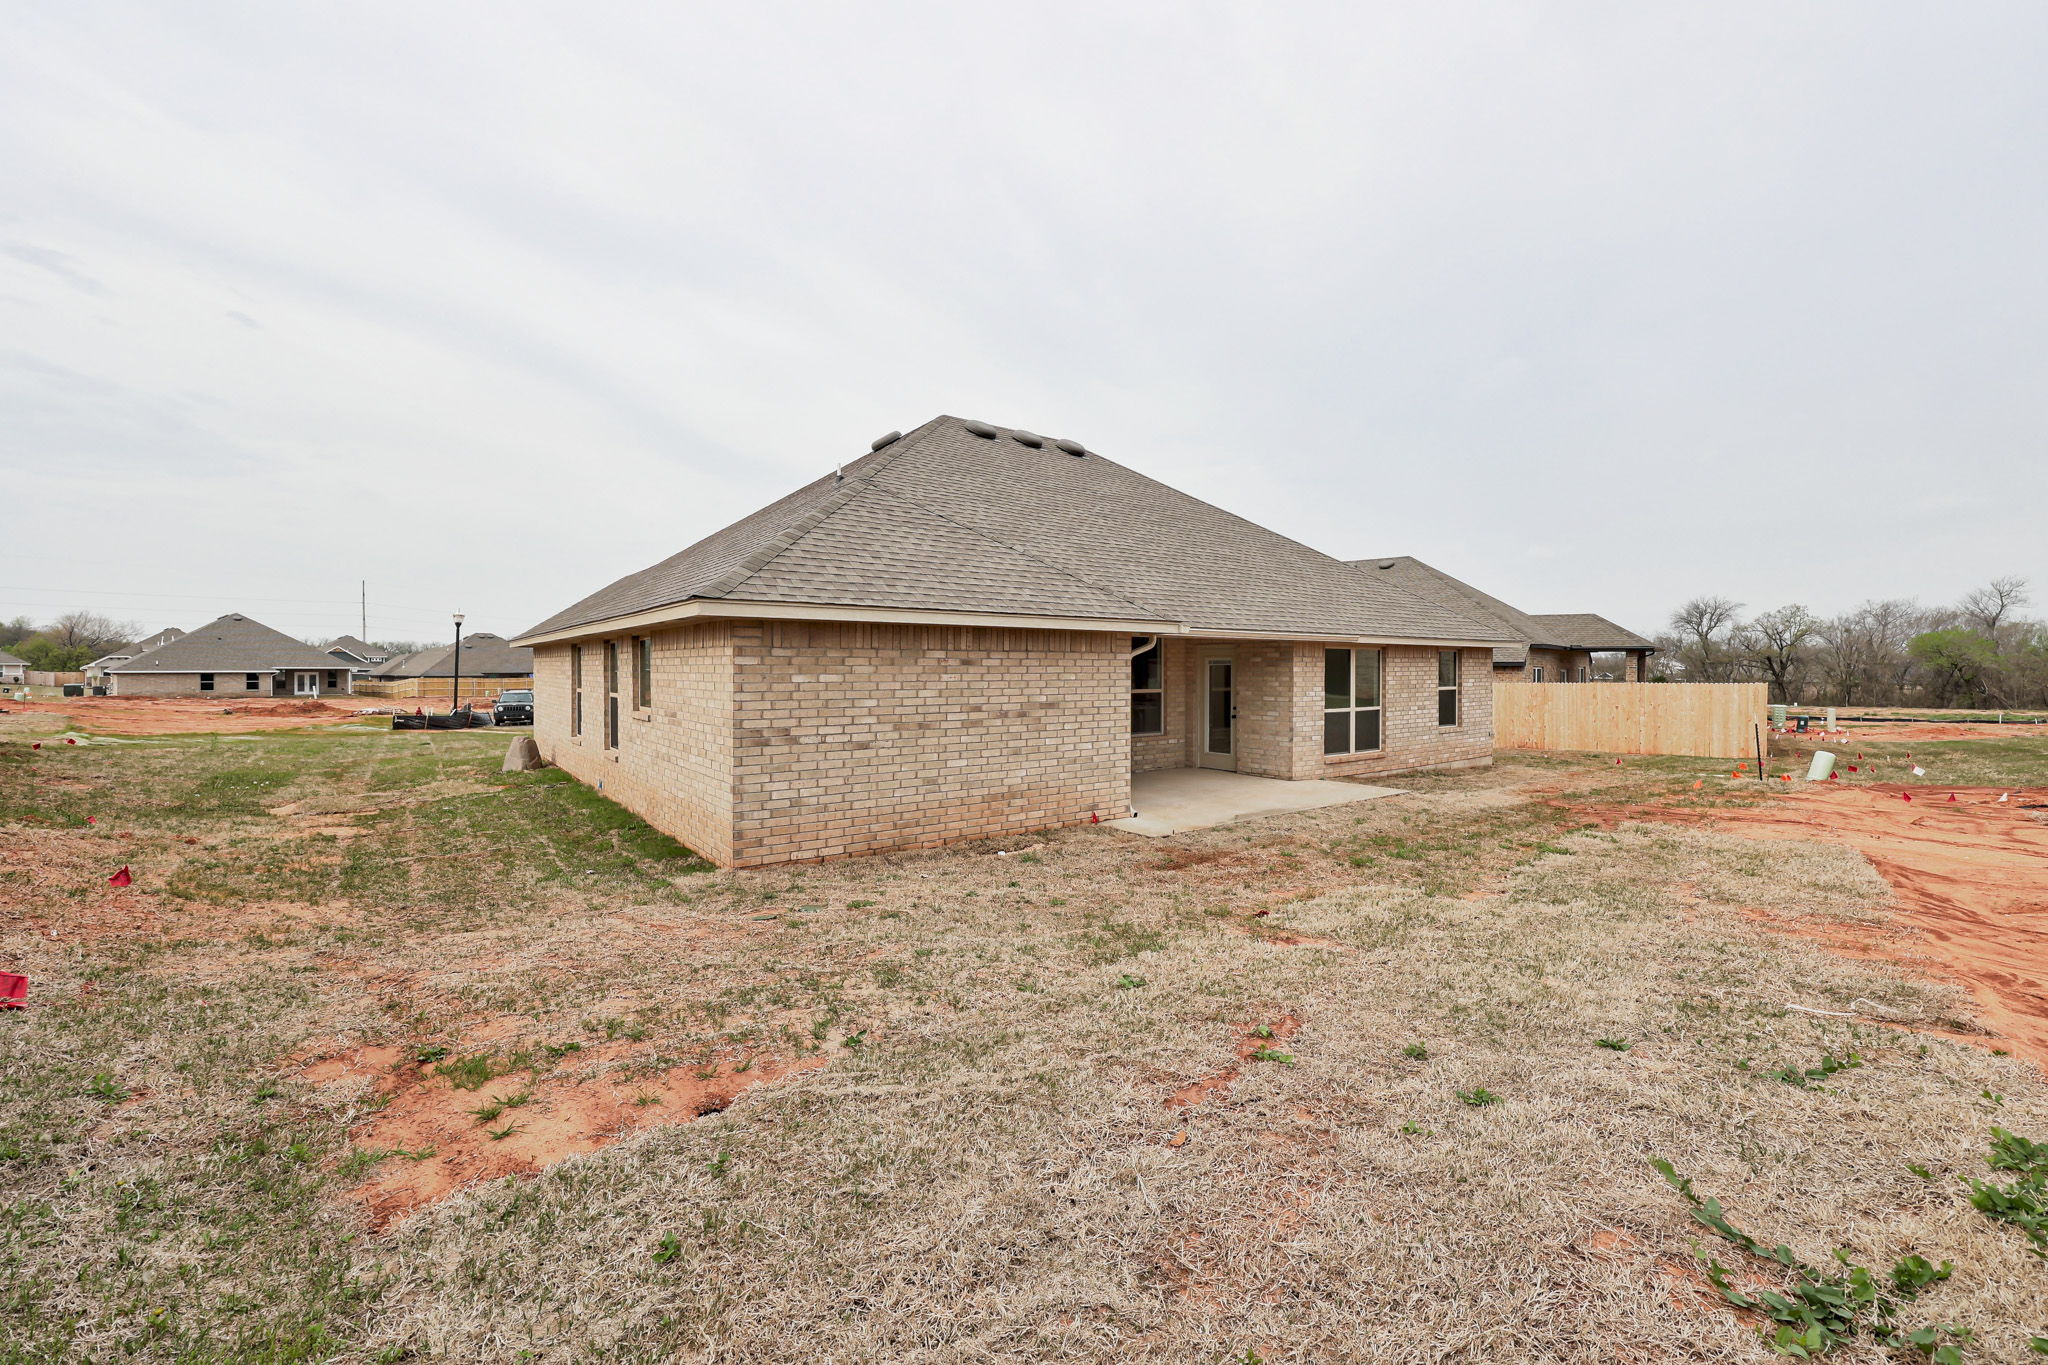 2909 SE 23rd St, Moore, Oklahoma 73160, 3 Bedrooms Bedrooms, ,2 BathroomsBathrooms,House,For Sale,SE 23rd St,1438